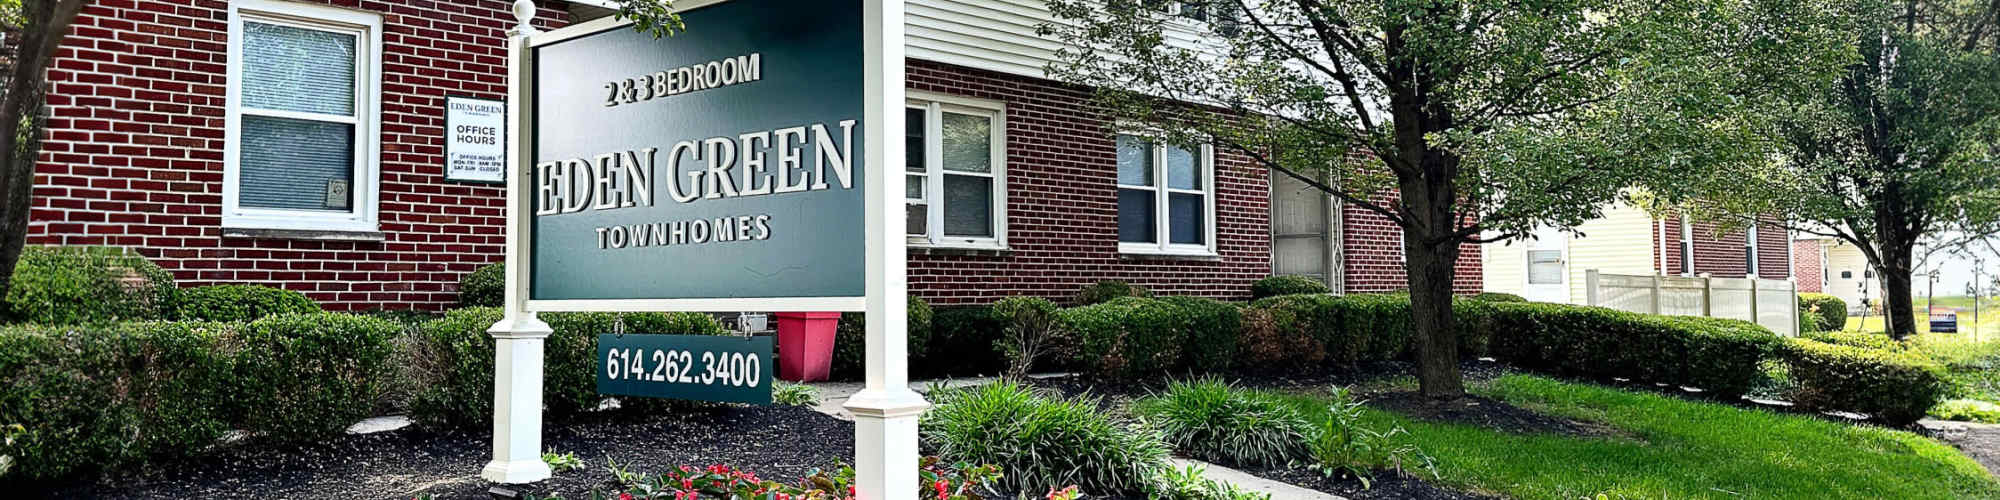 Photo Gallery | Eden Green Townhomes in Columbus, Ohio